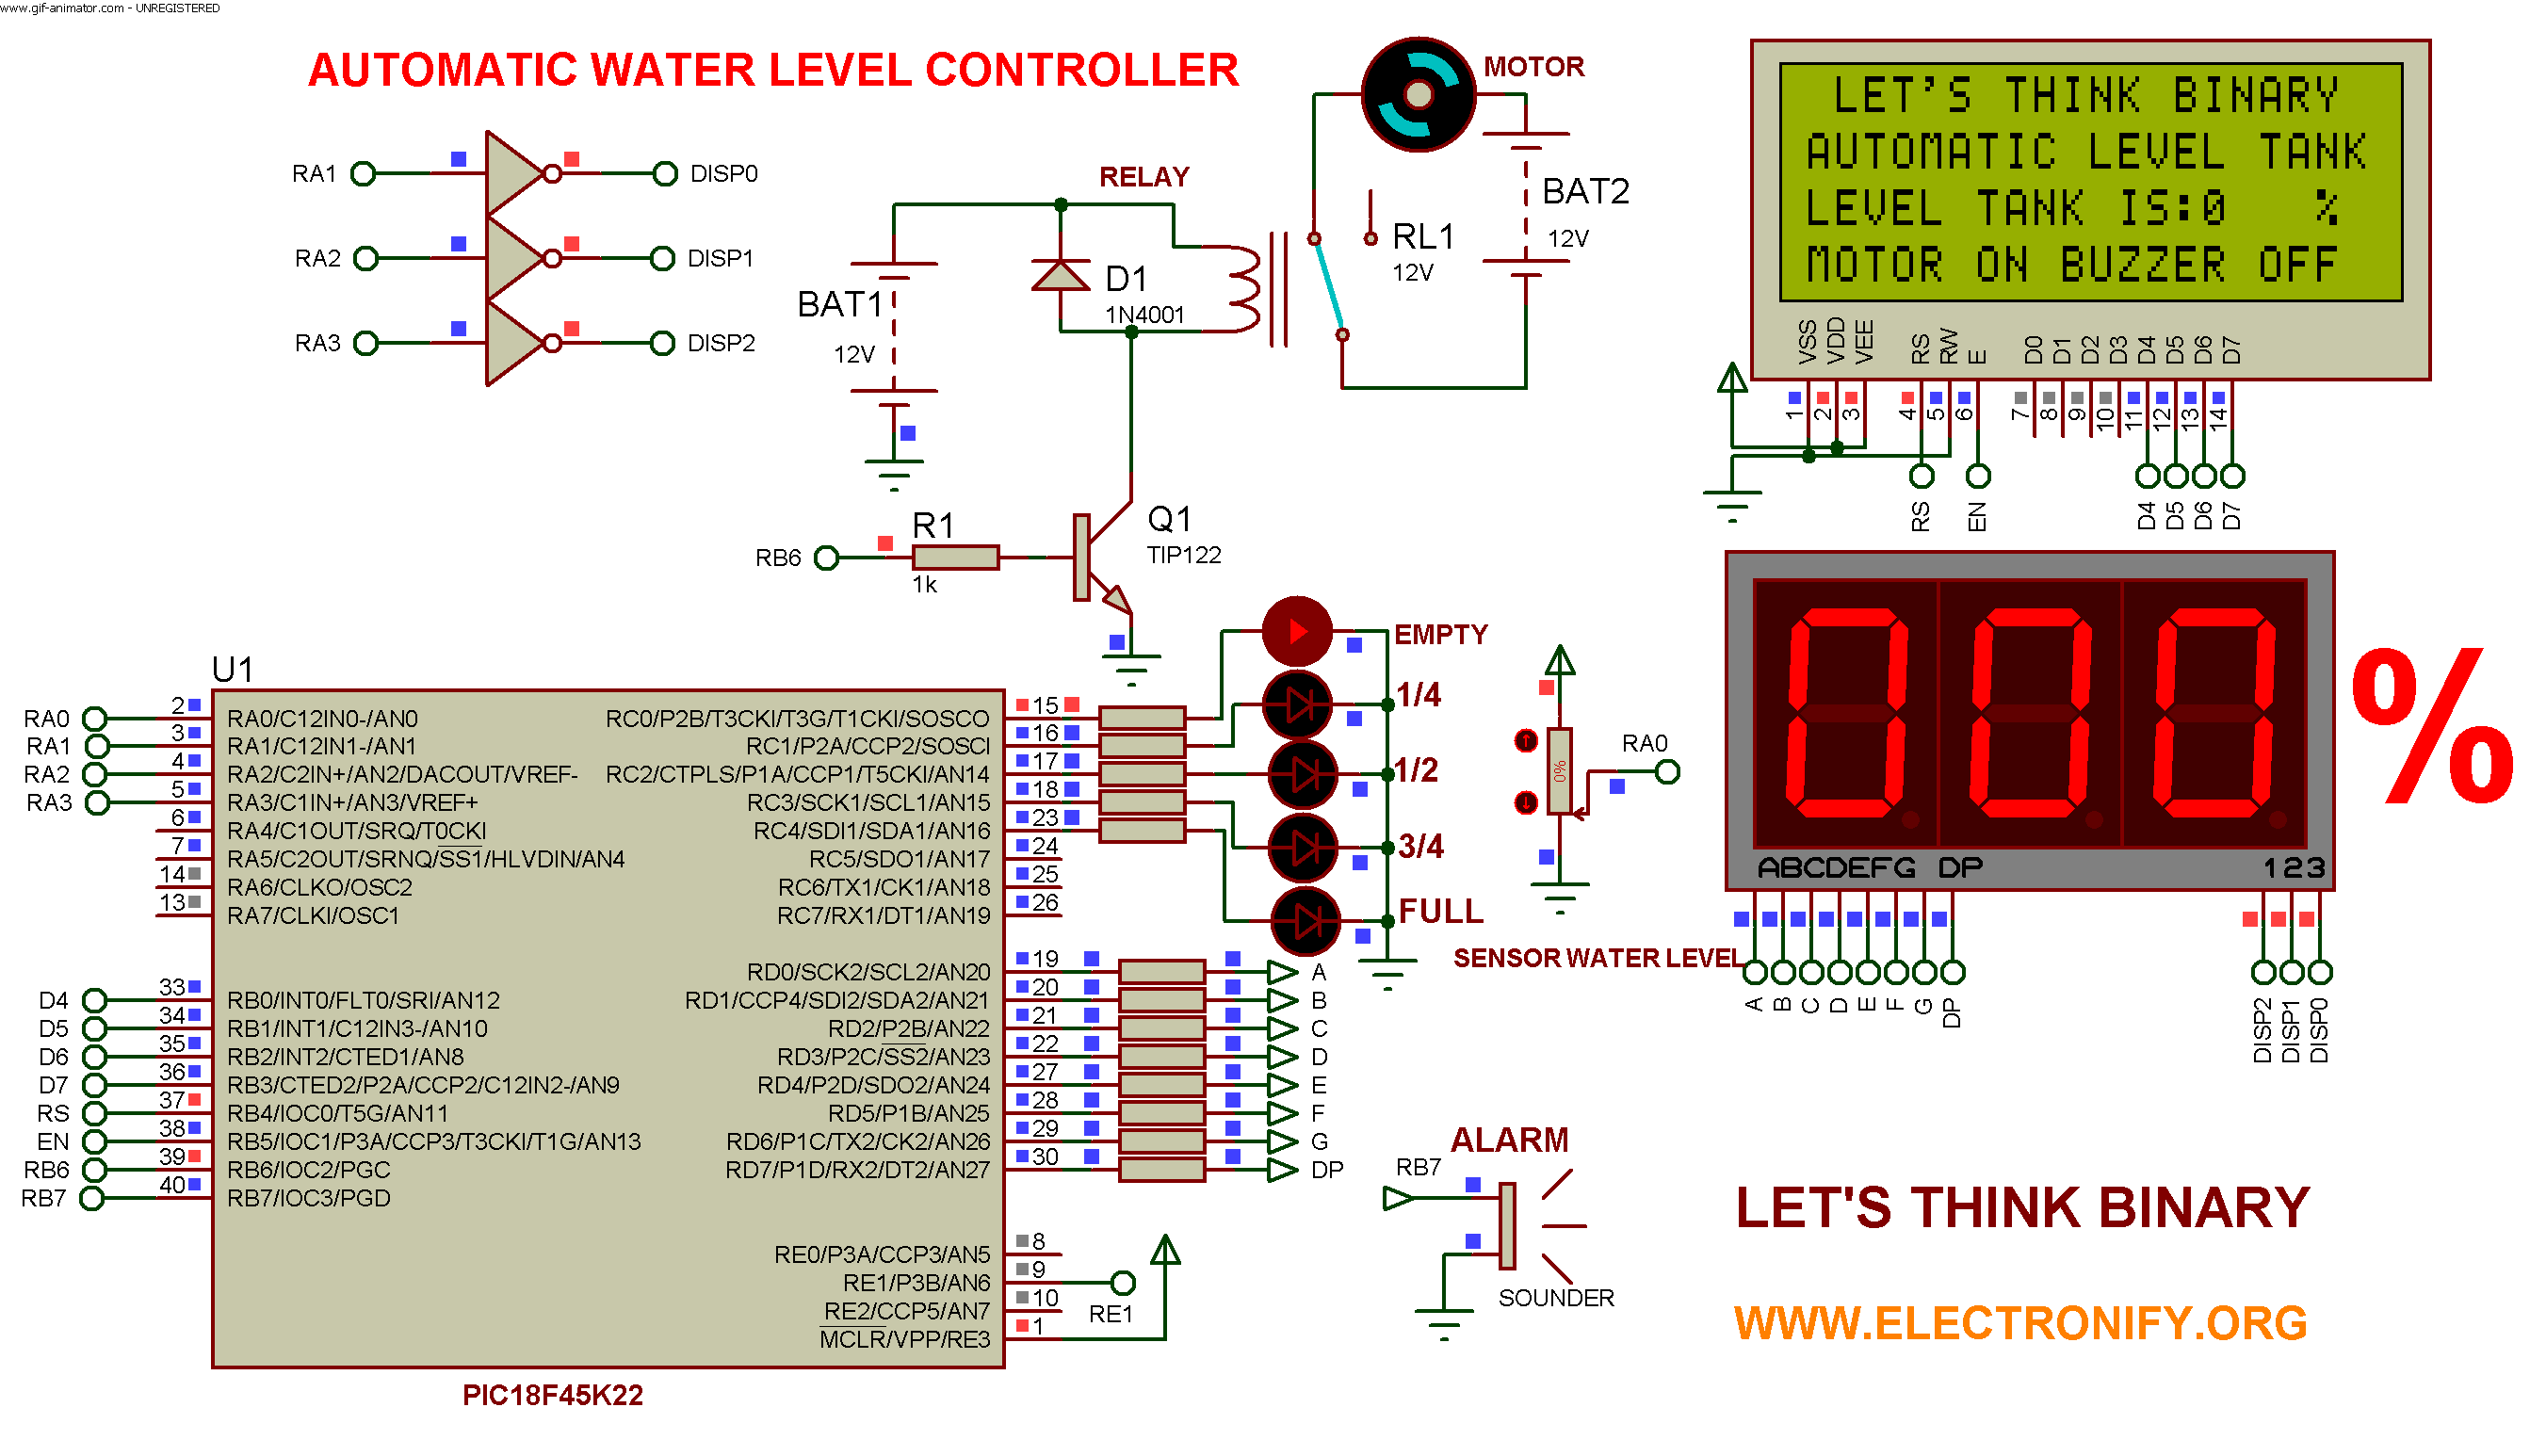 AUTOMATIC-WATER-LEVEL-CONTROLLER-USING-MICROCONTROLLER-PIC18F45K22-schematic-diagram.gif